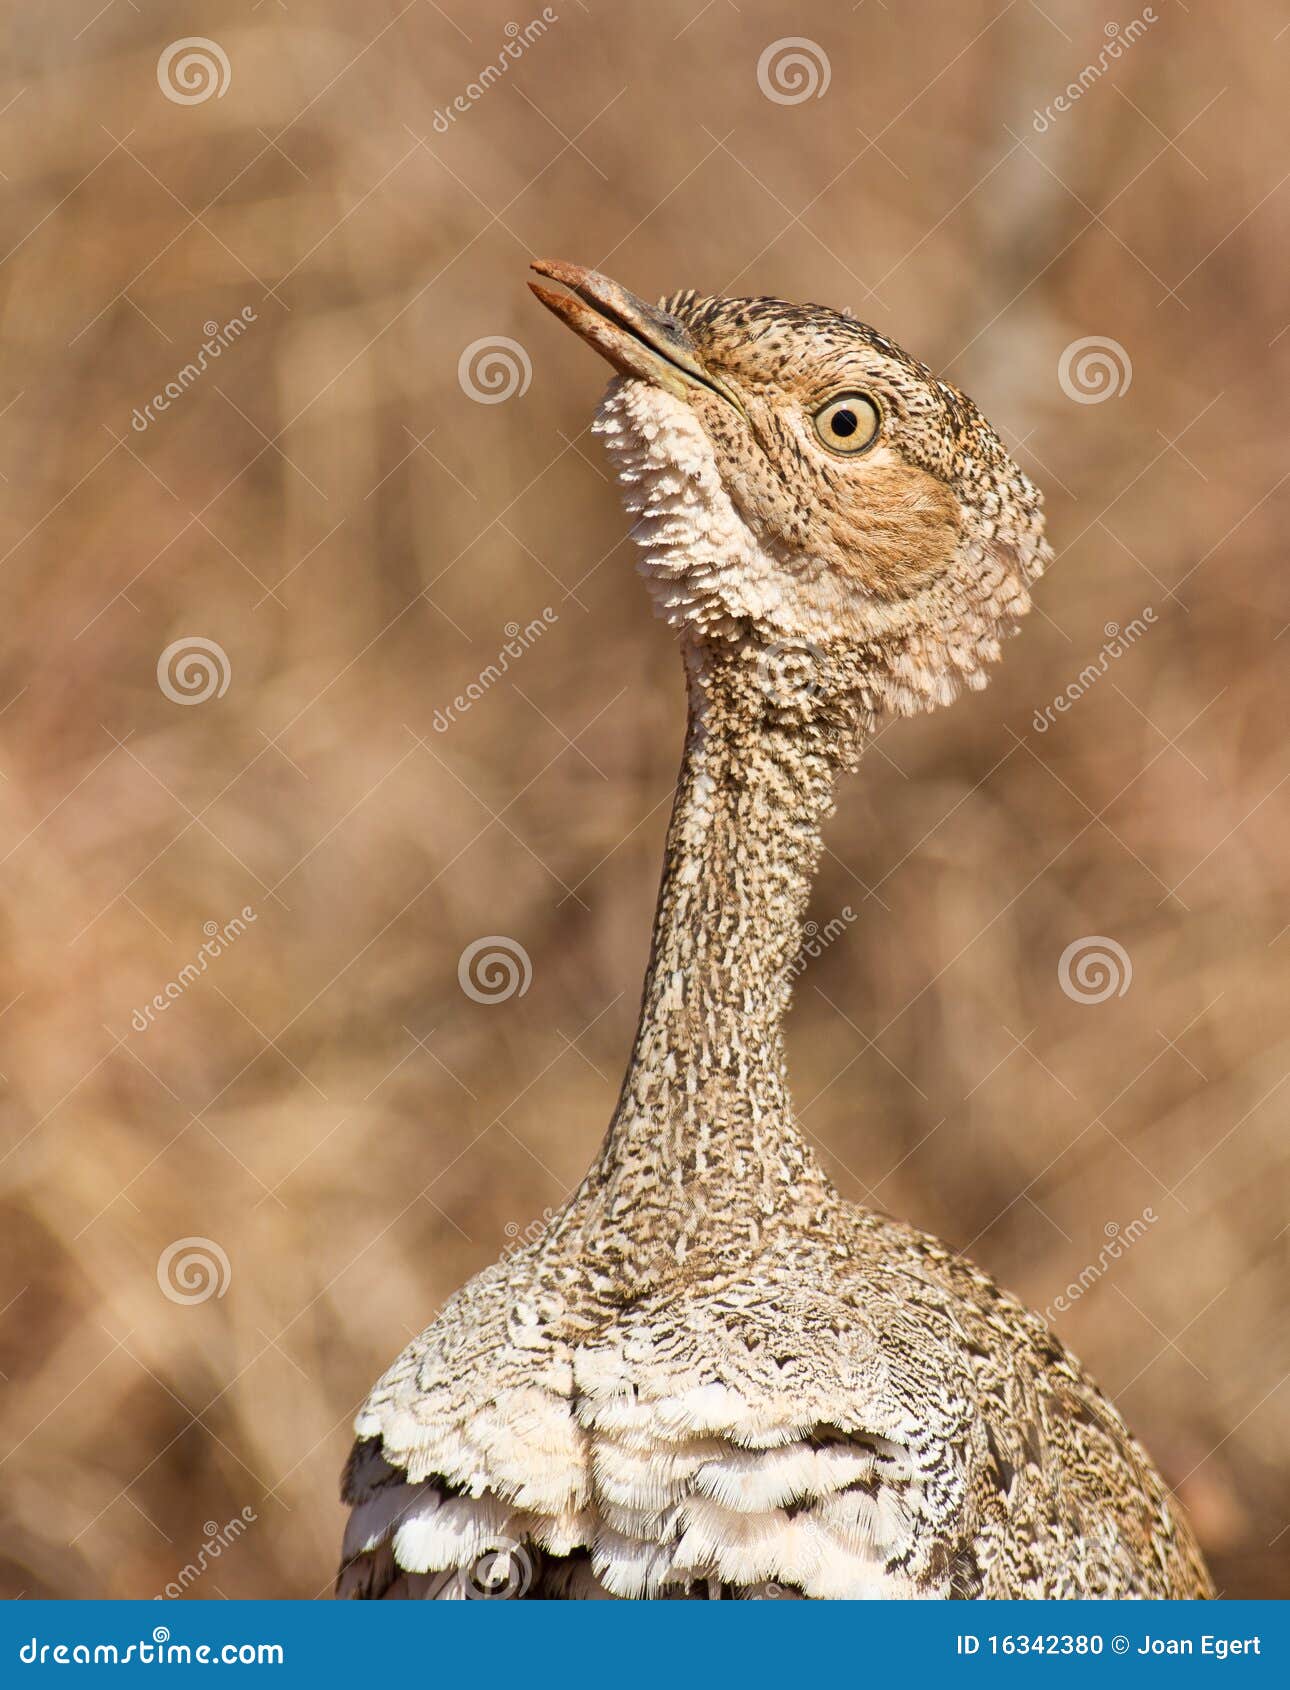 a portrait of the buff-crested bustard